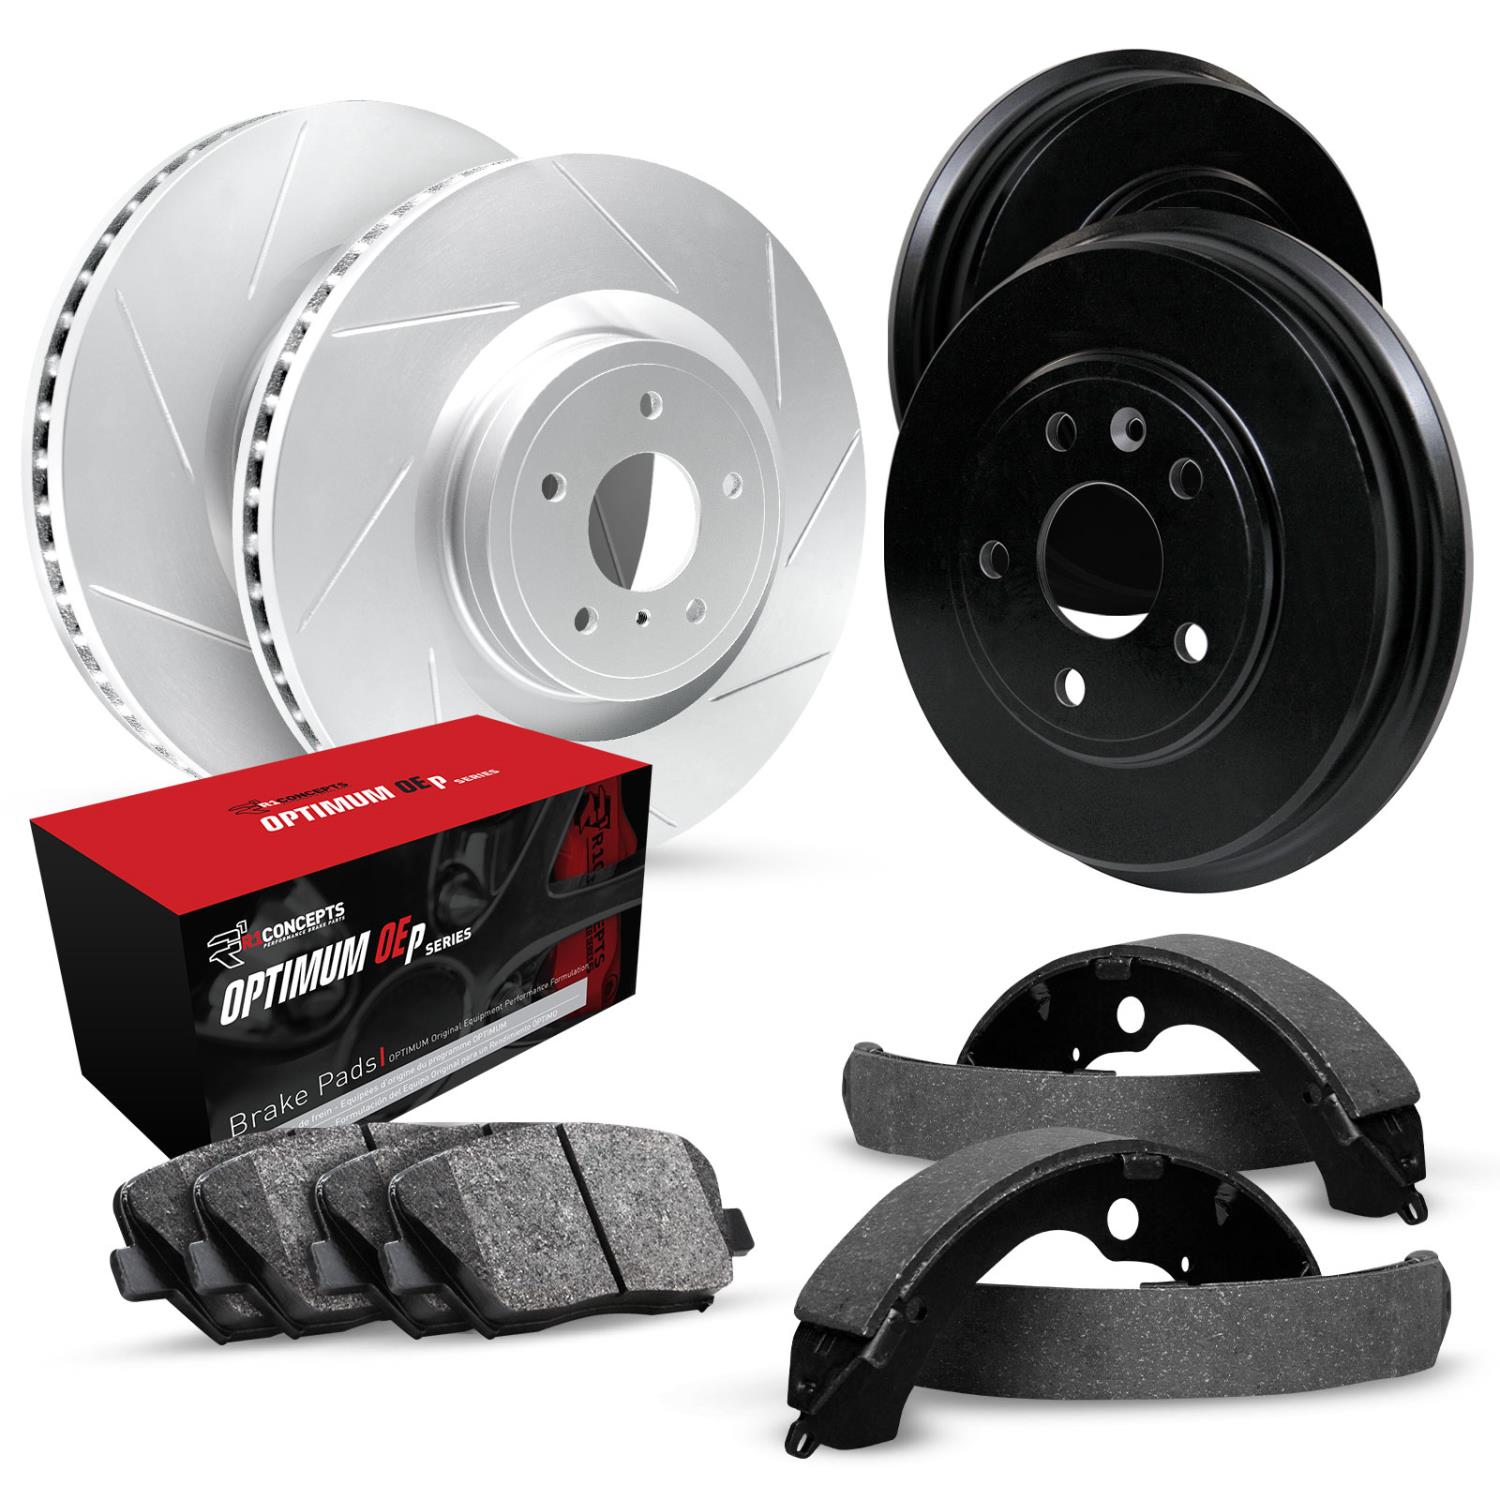 GEO-Carbon Slotted Brake Rotor & Drum Set w/Optimum OE Pads & Shoes, 1972-1973 GM, Position: Front & Rear